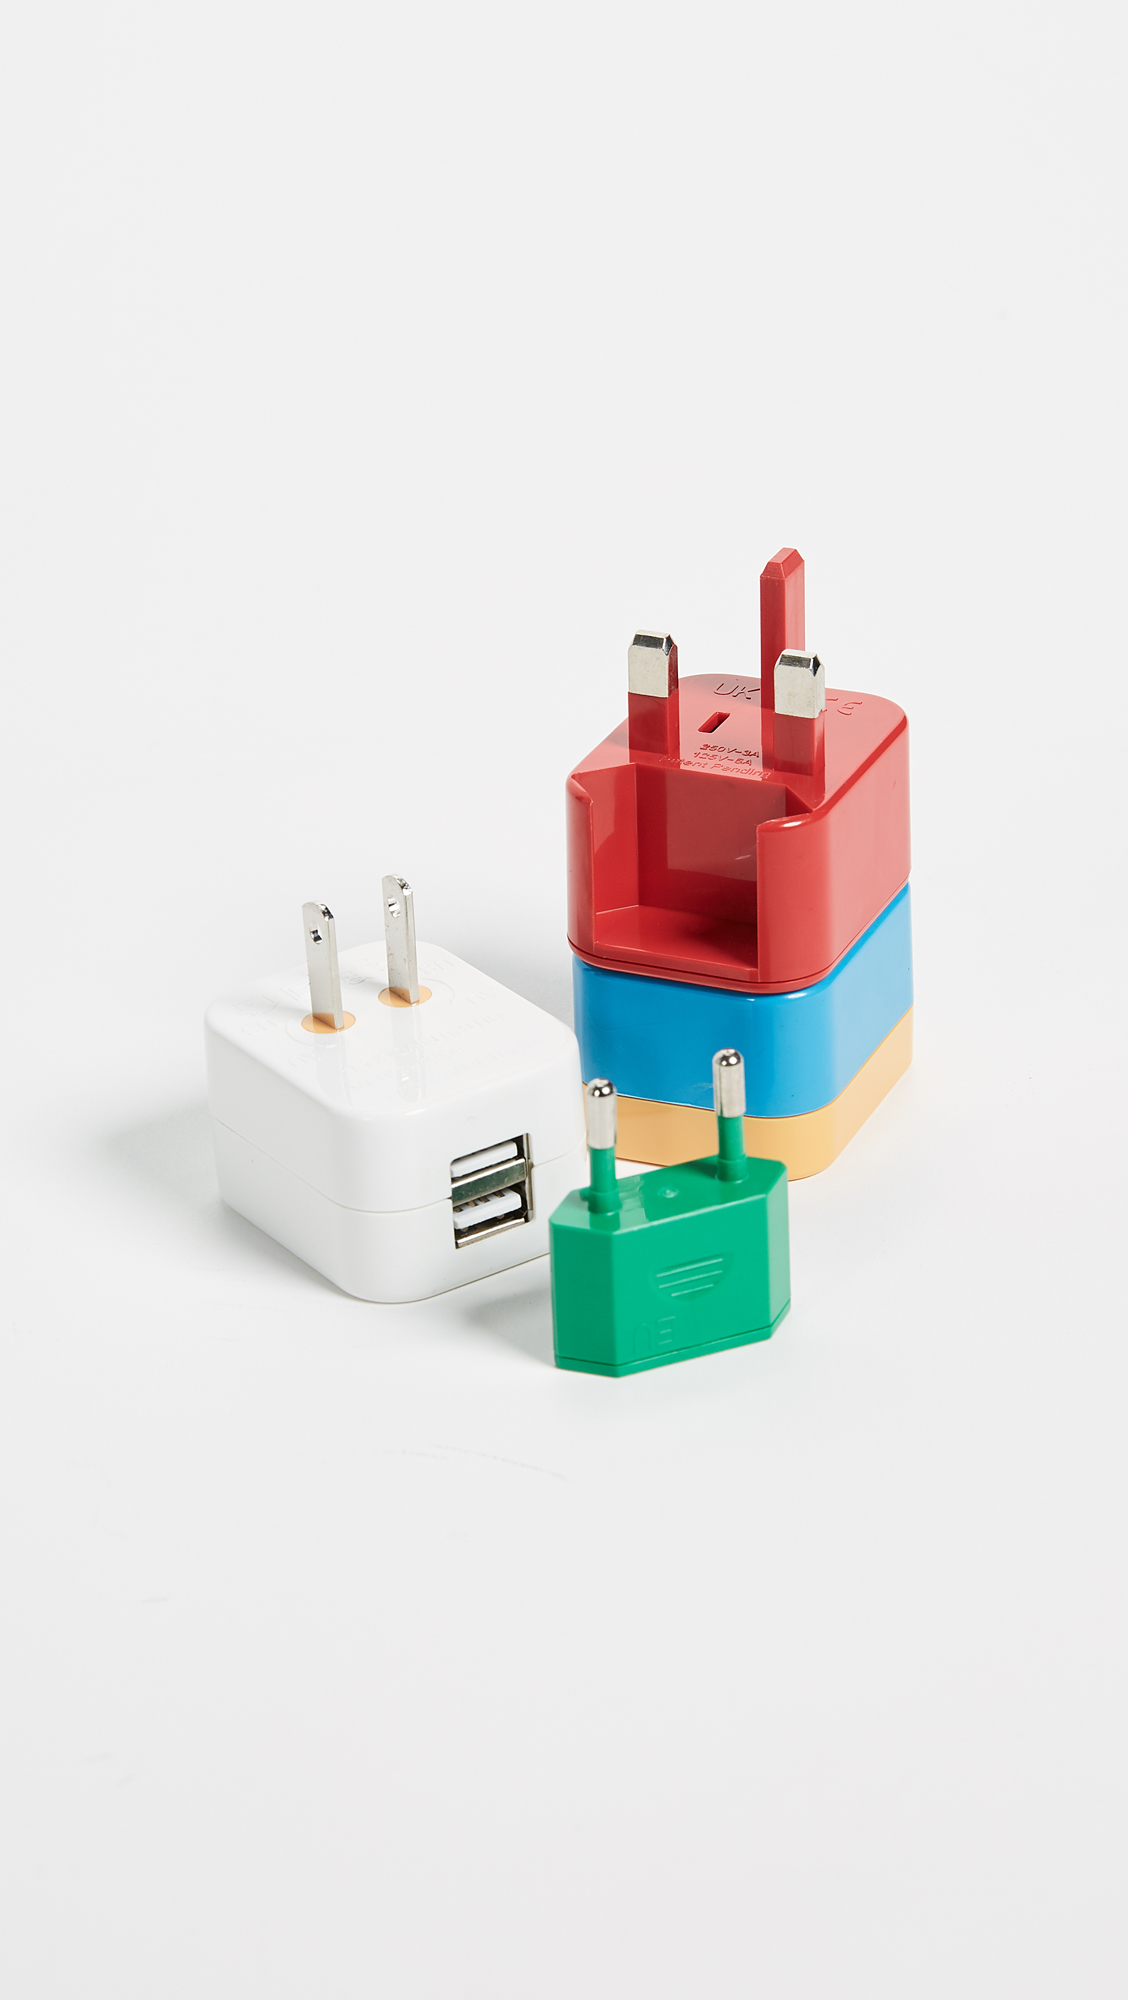 5-in-1 Universal Adapter